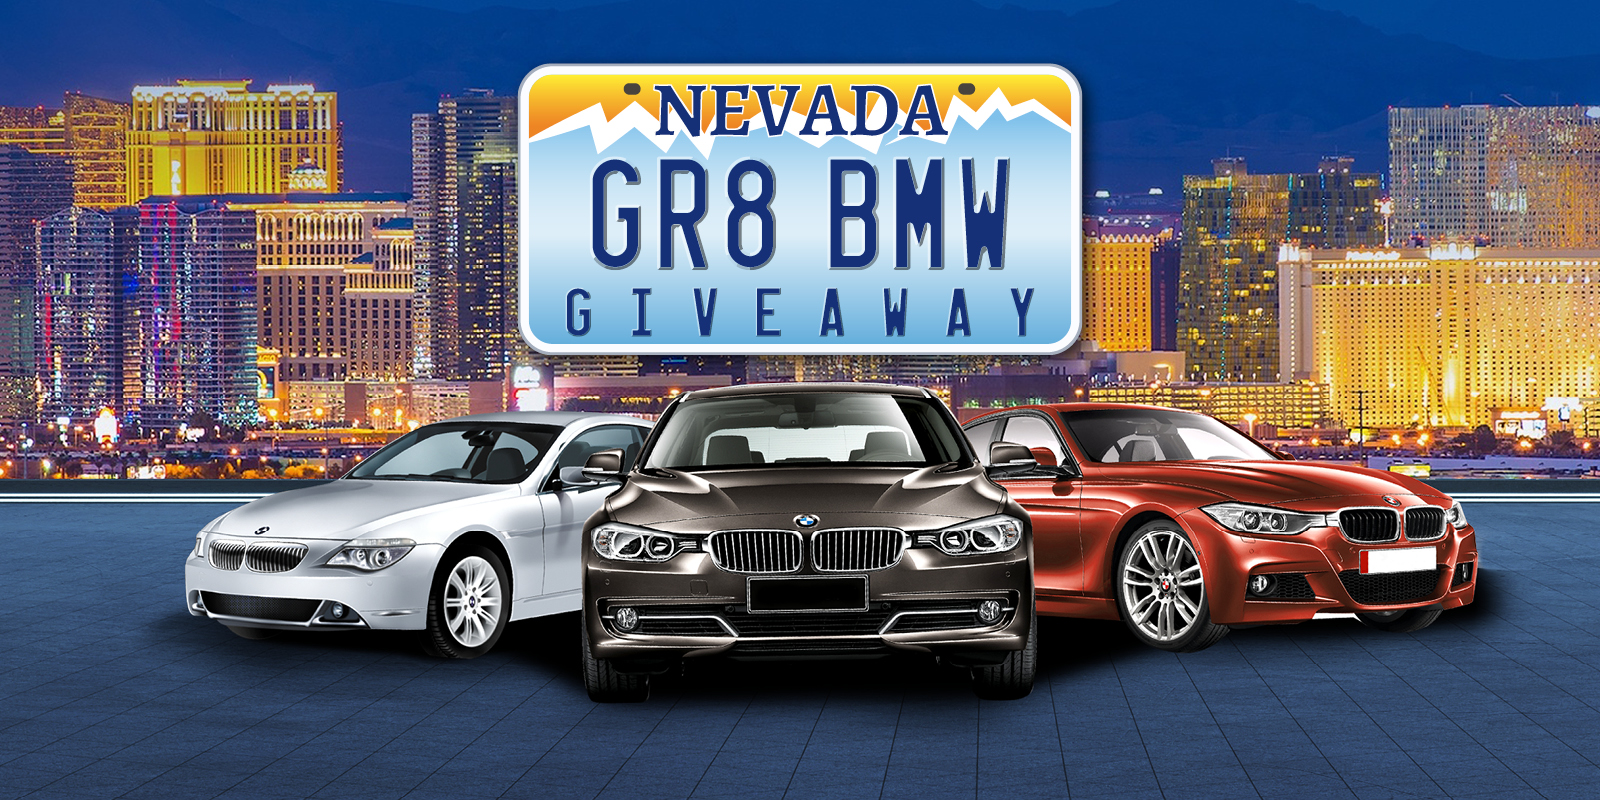 GR8 BMW Giveaway visual. Shows a silver, grey + red BMW with a Nevada license plate